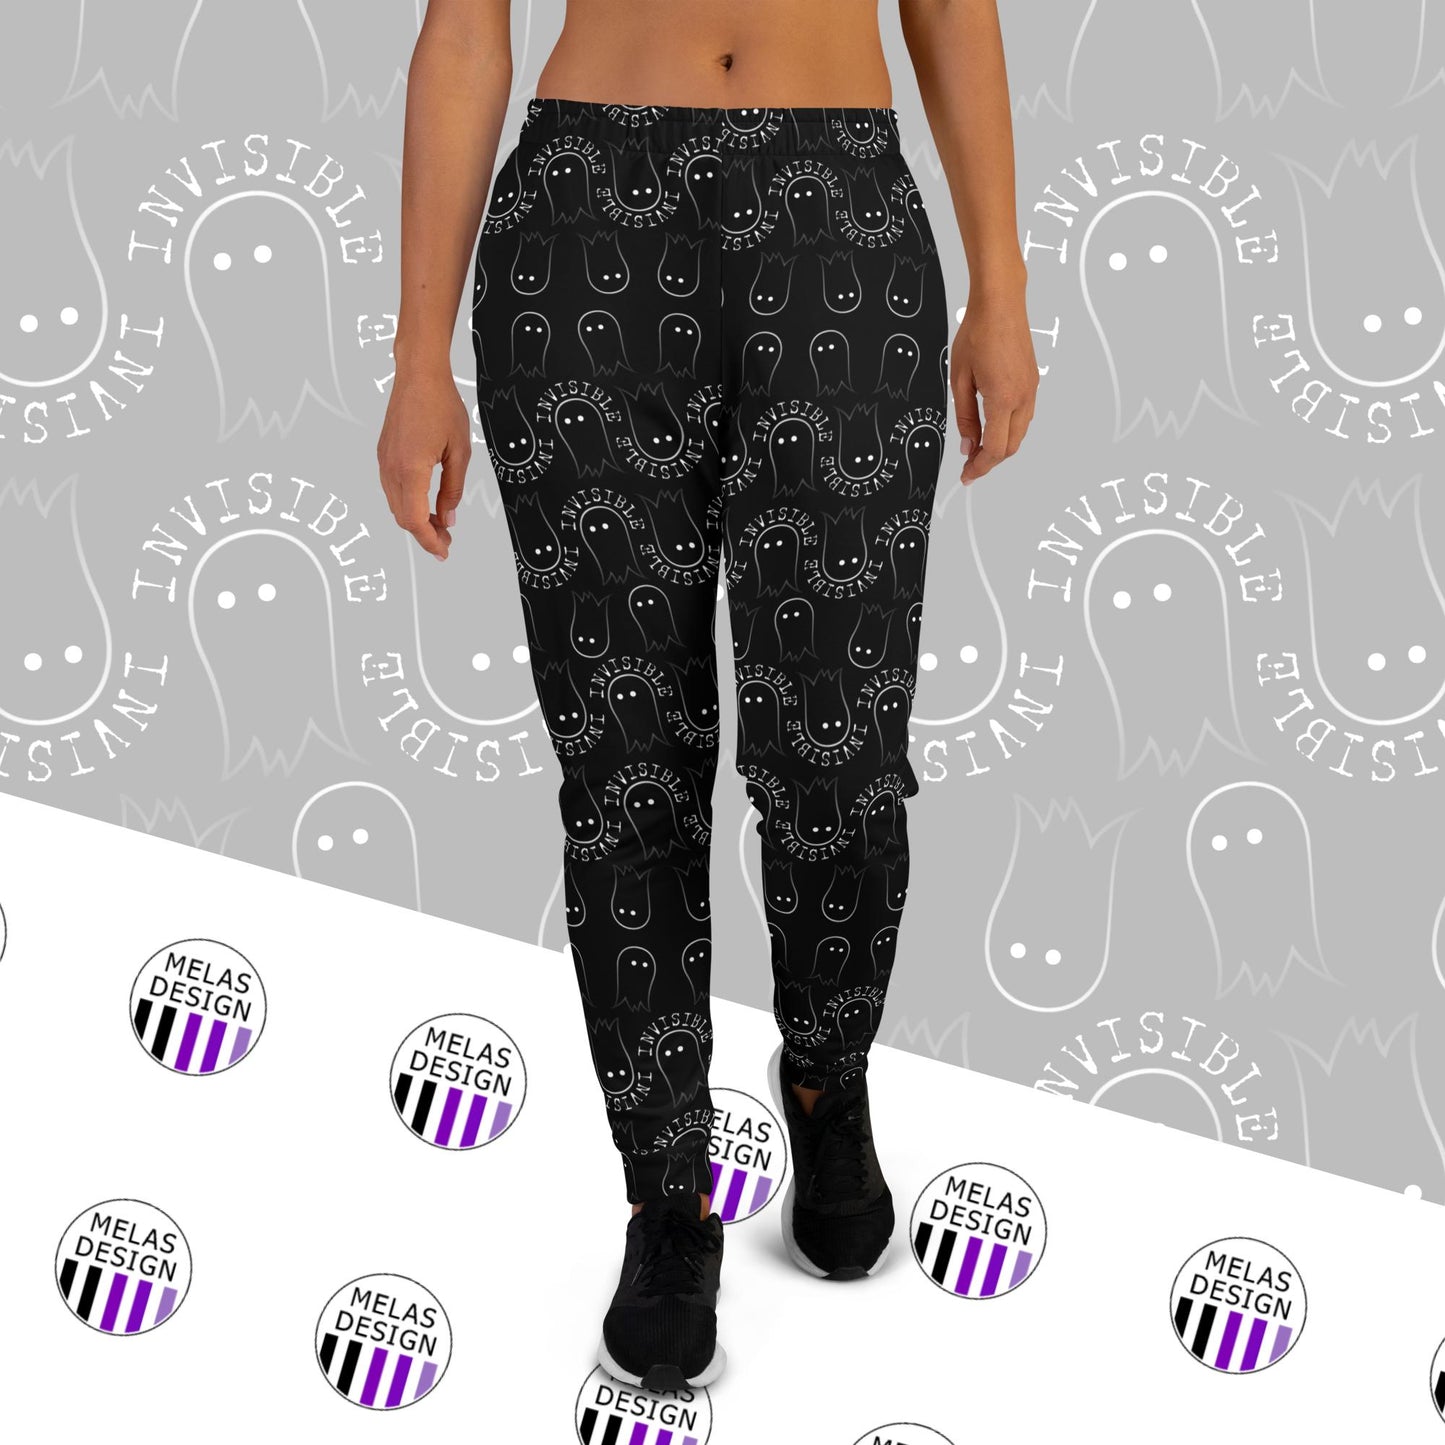 invisible ghost emoji pattern womens joggers; Melasdesign; fashion; cute; paranormal; black and white; gothic; witchy; Halloween; ghosts; pants; ghost hunter; shy; style; fashion